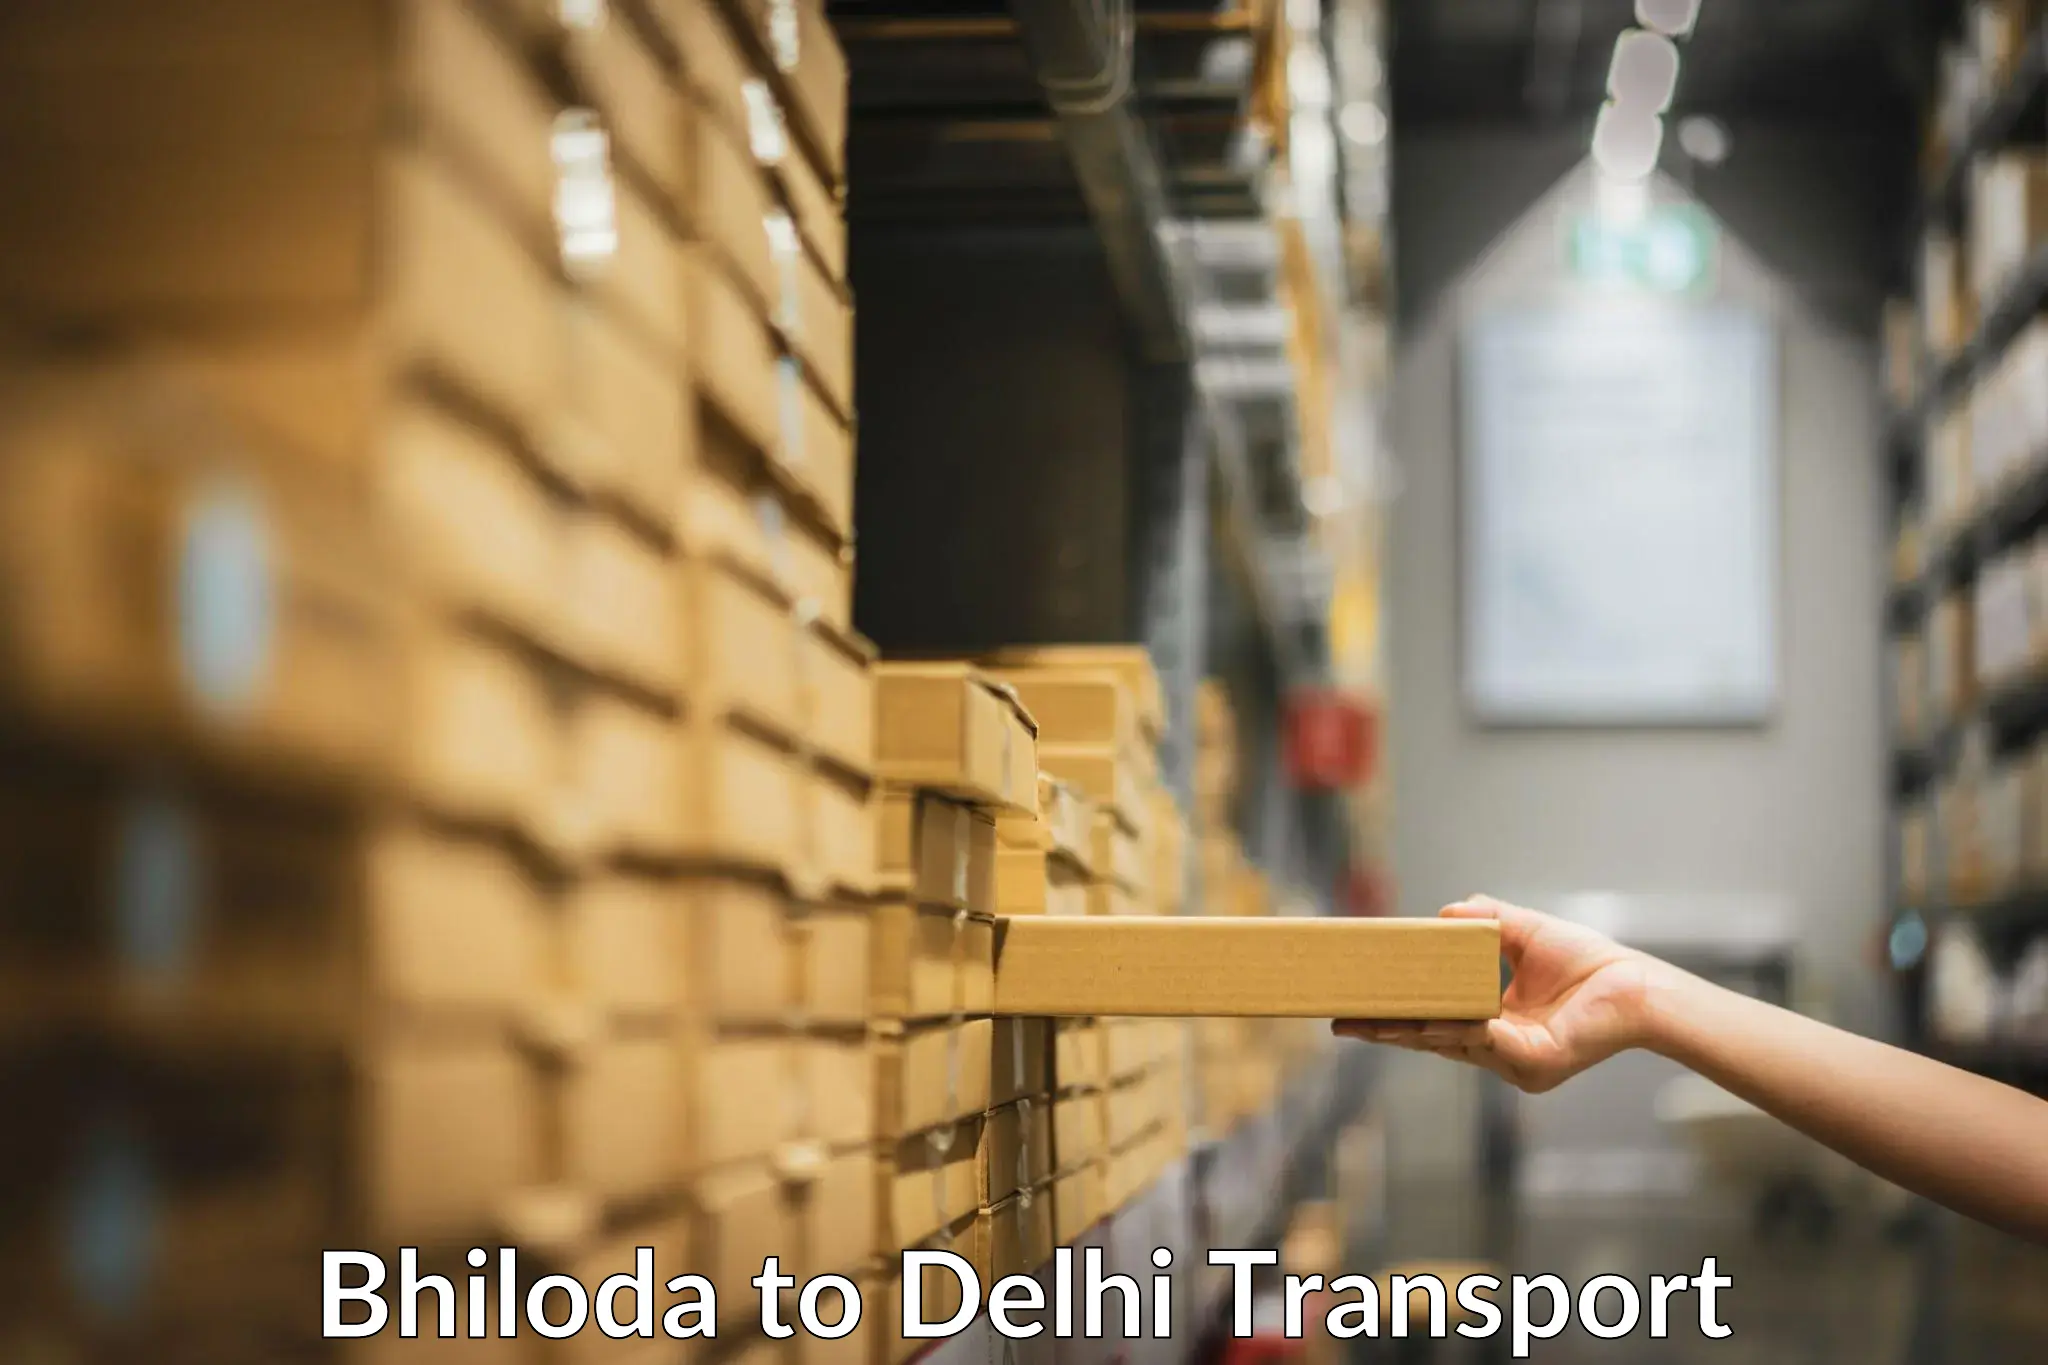 Domestic transport services Bhiloda to NCR